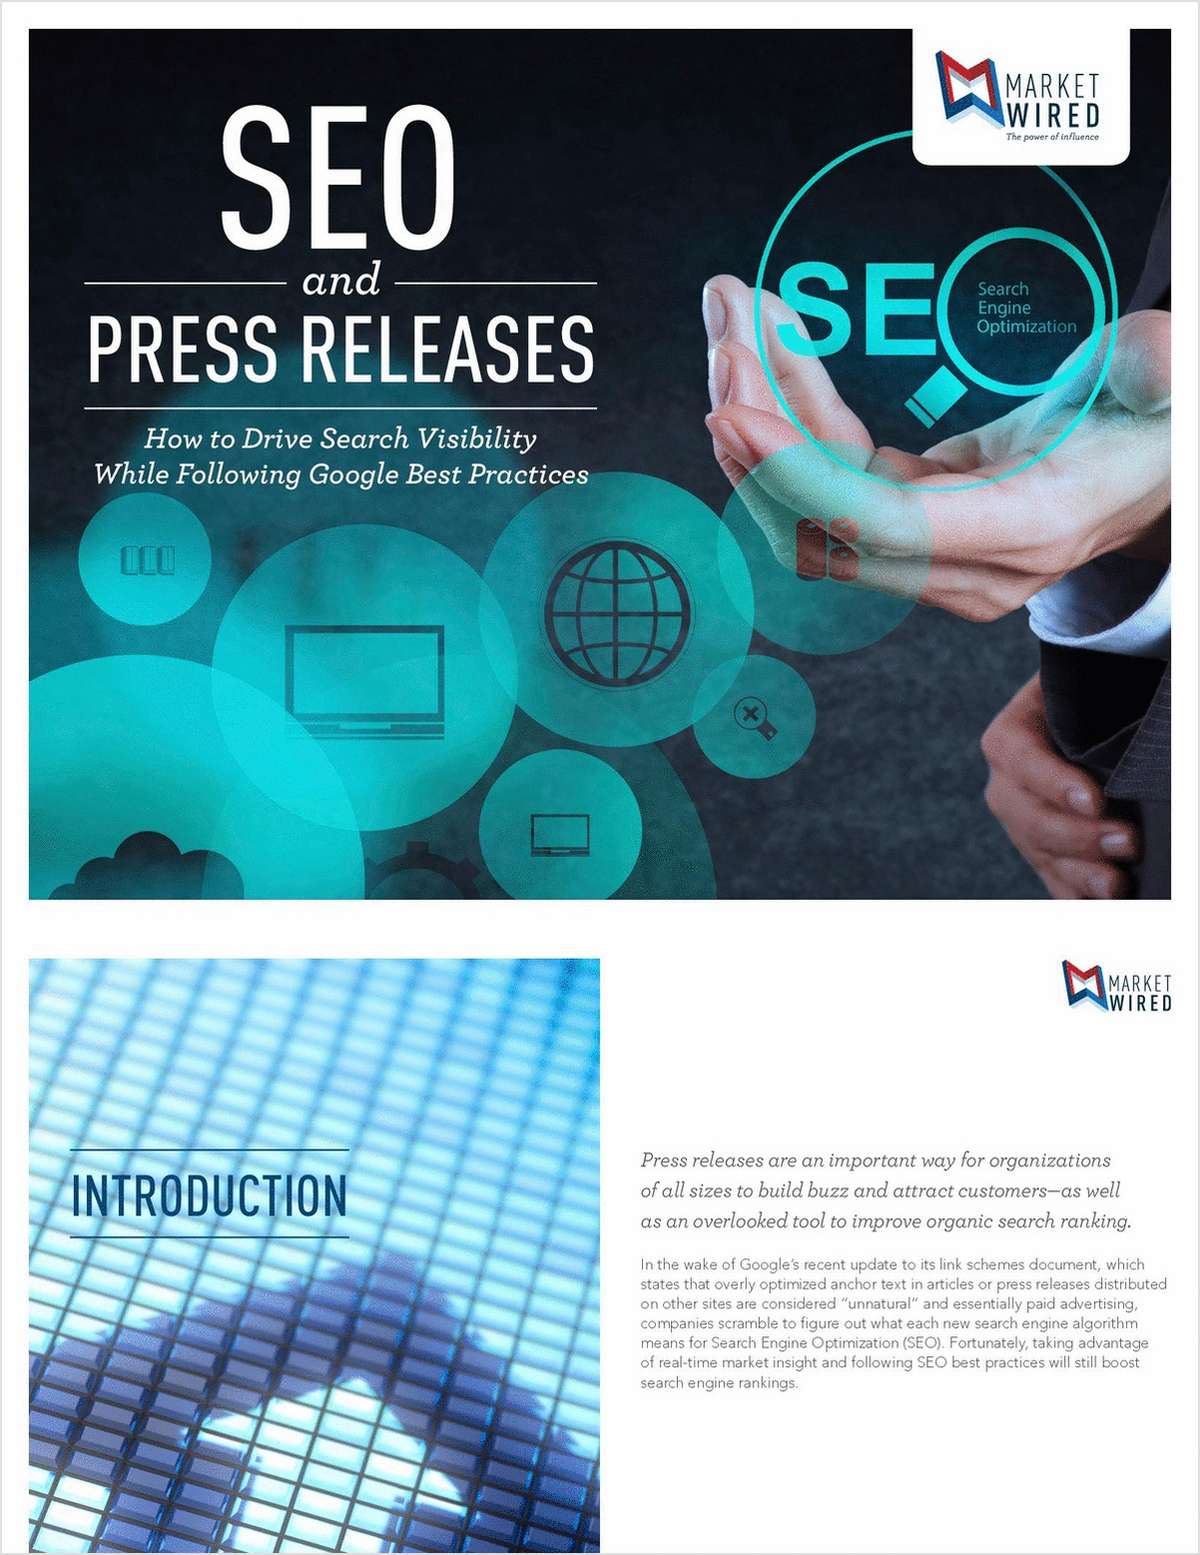 8 Tips to Create Search-Friendly Press Releases